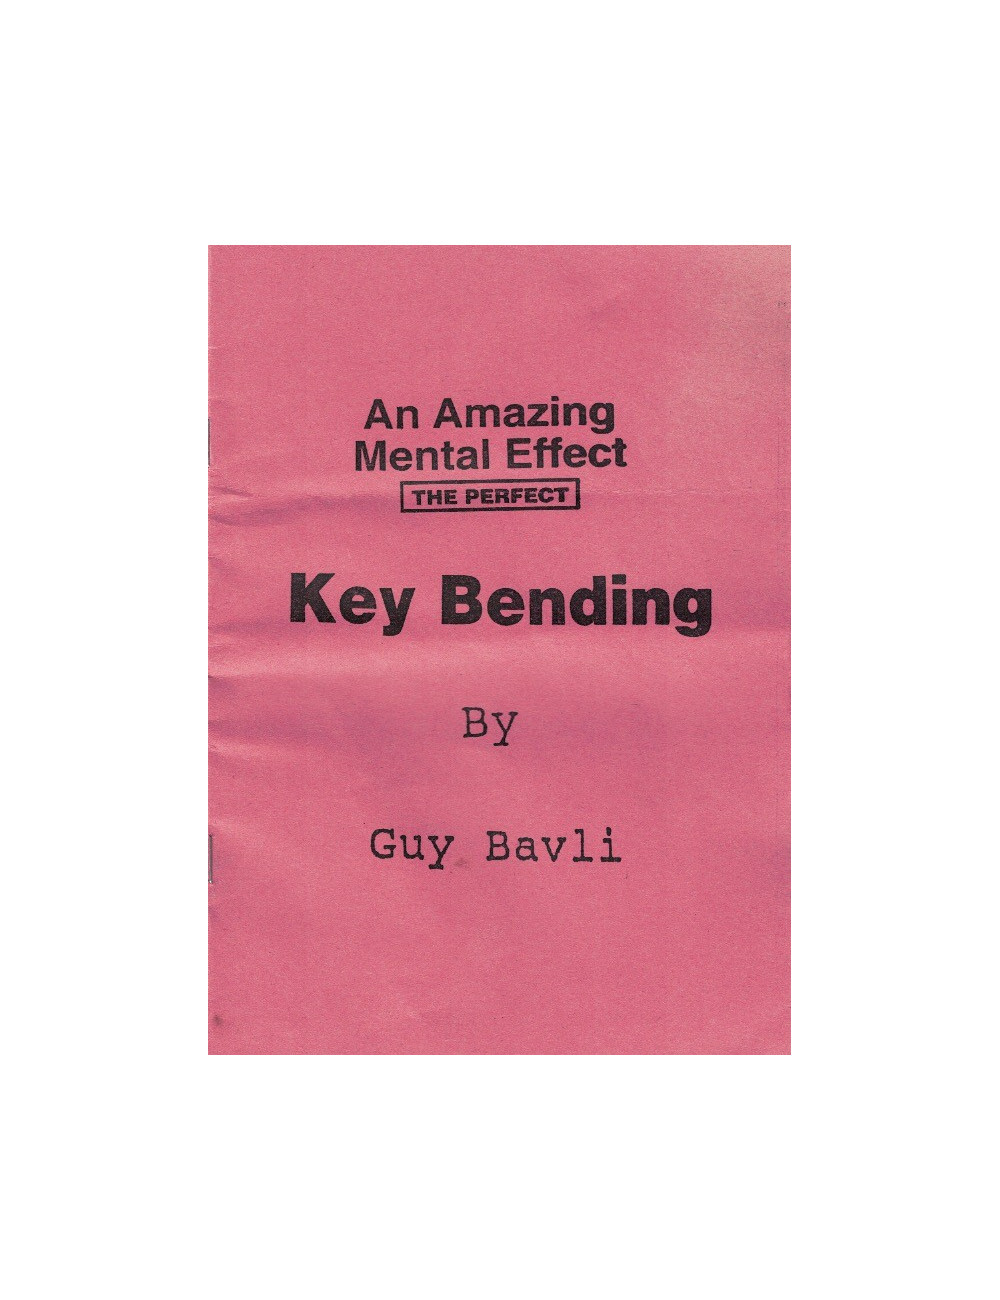 THE PERFECT KEY BENDING By Guy Bavli